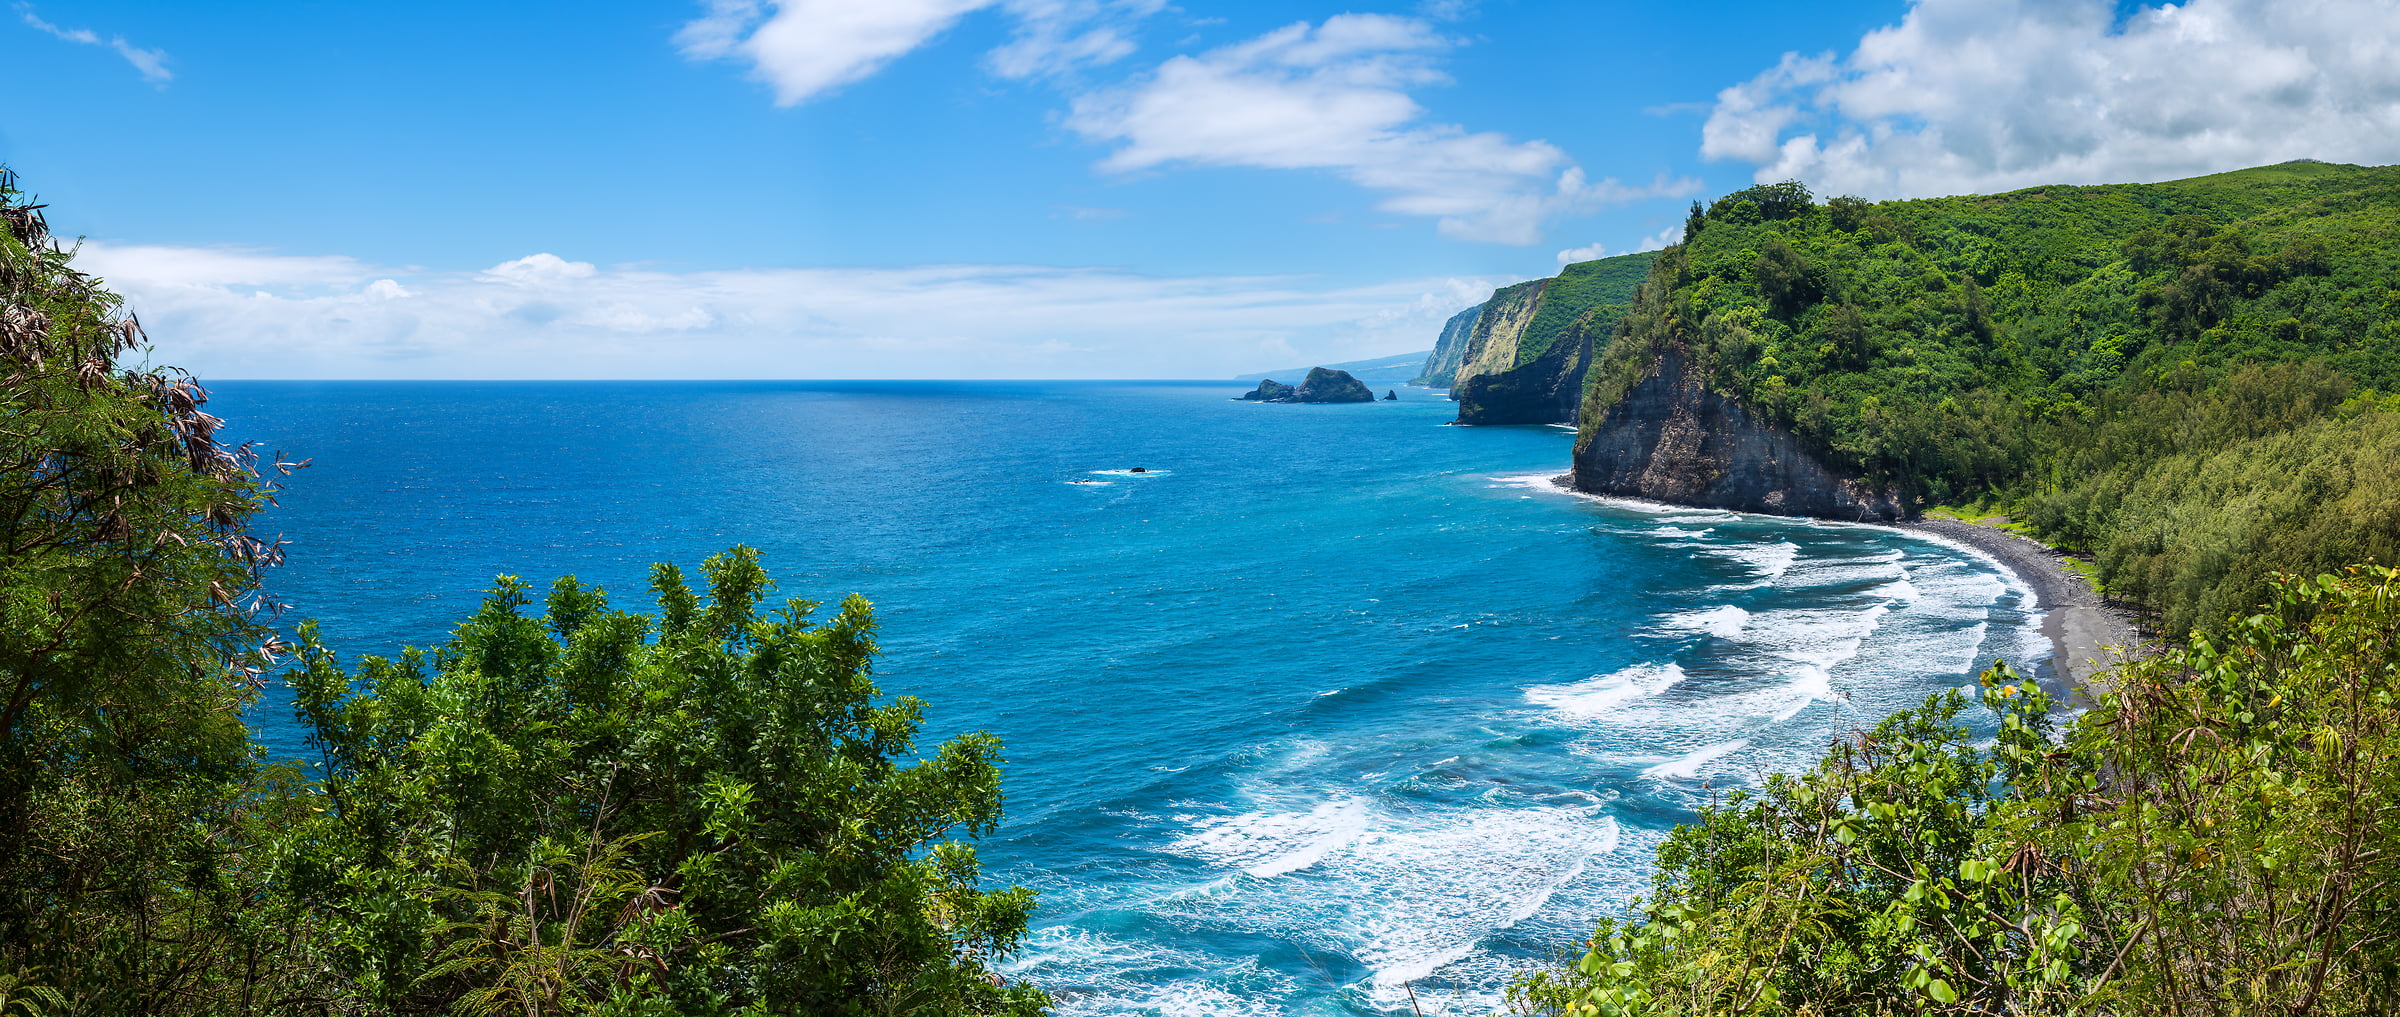 293 megapixels! A very high resolution, large-format VAST photo of the coastline in Hawaii with the ocean; landscape photograph created by Jim Tarpo in Pololu Valley, Hawaii.